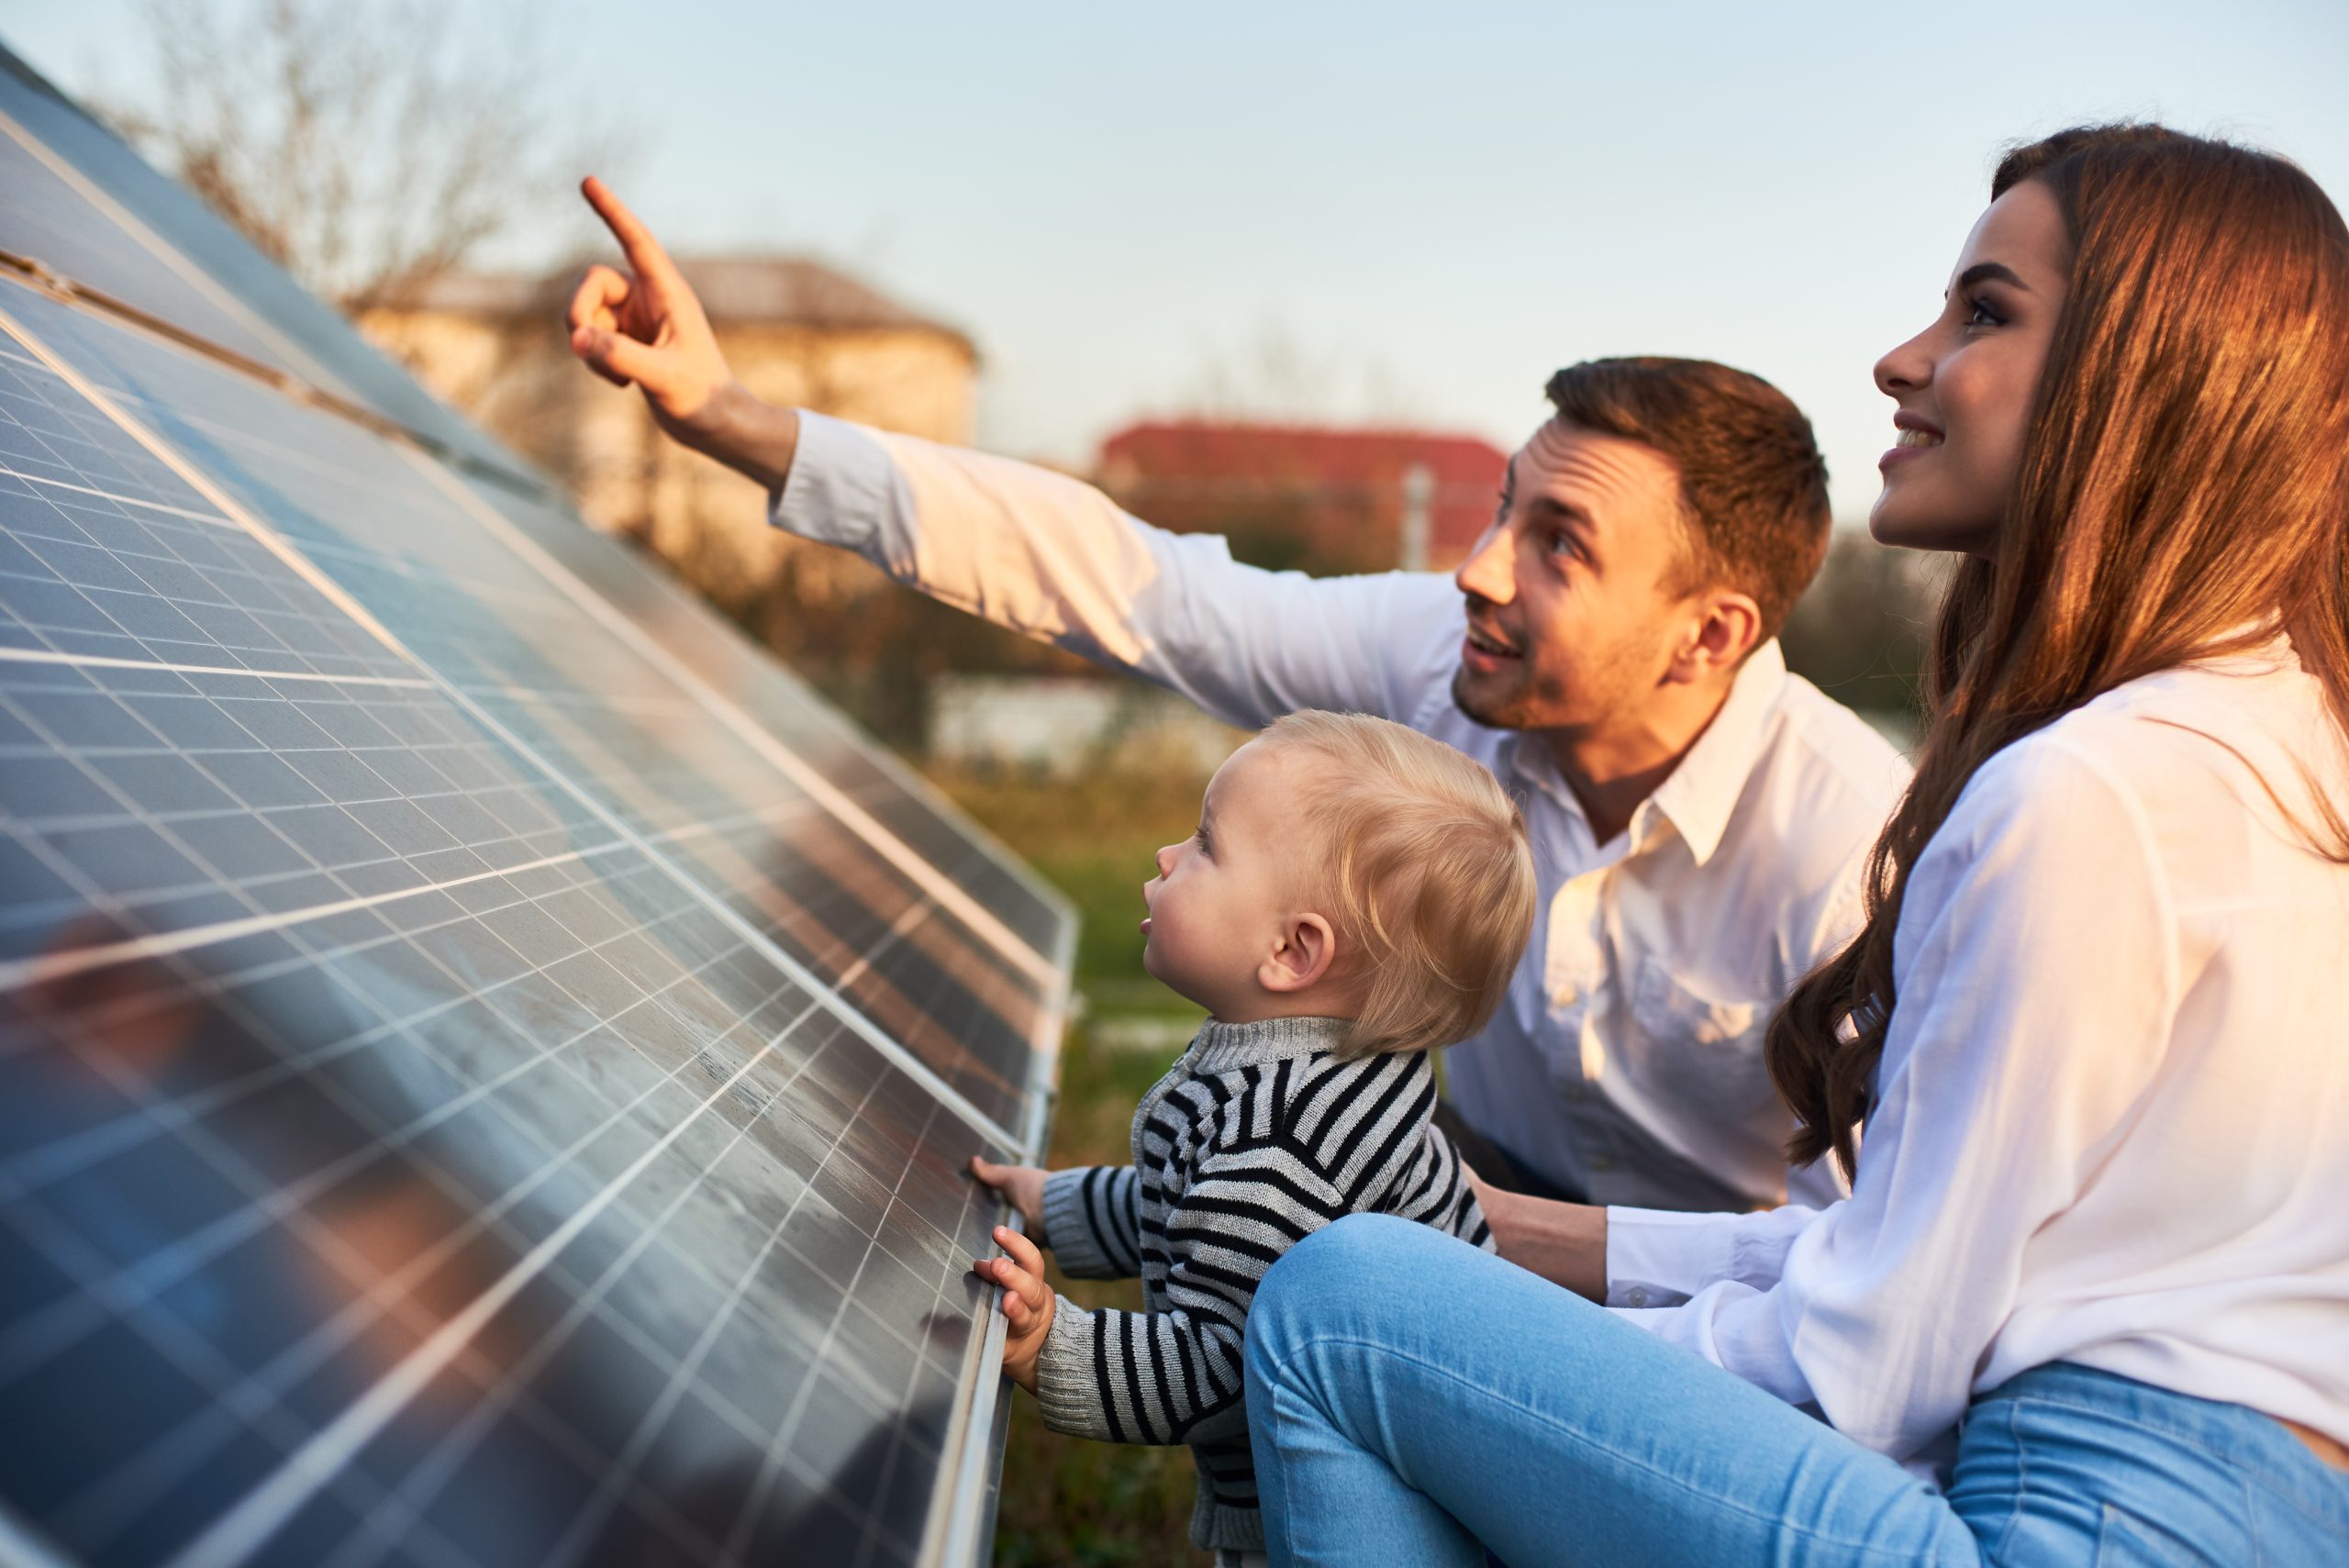 Two Factors Driving the Growth of Solar